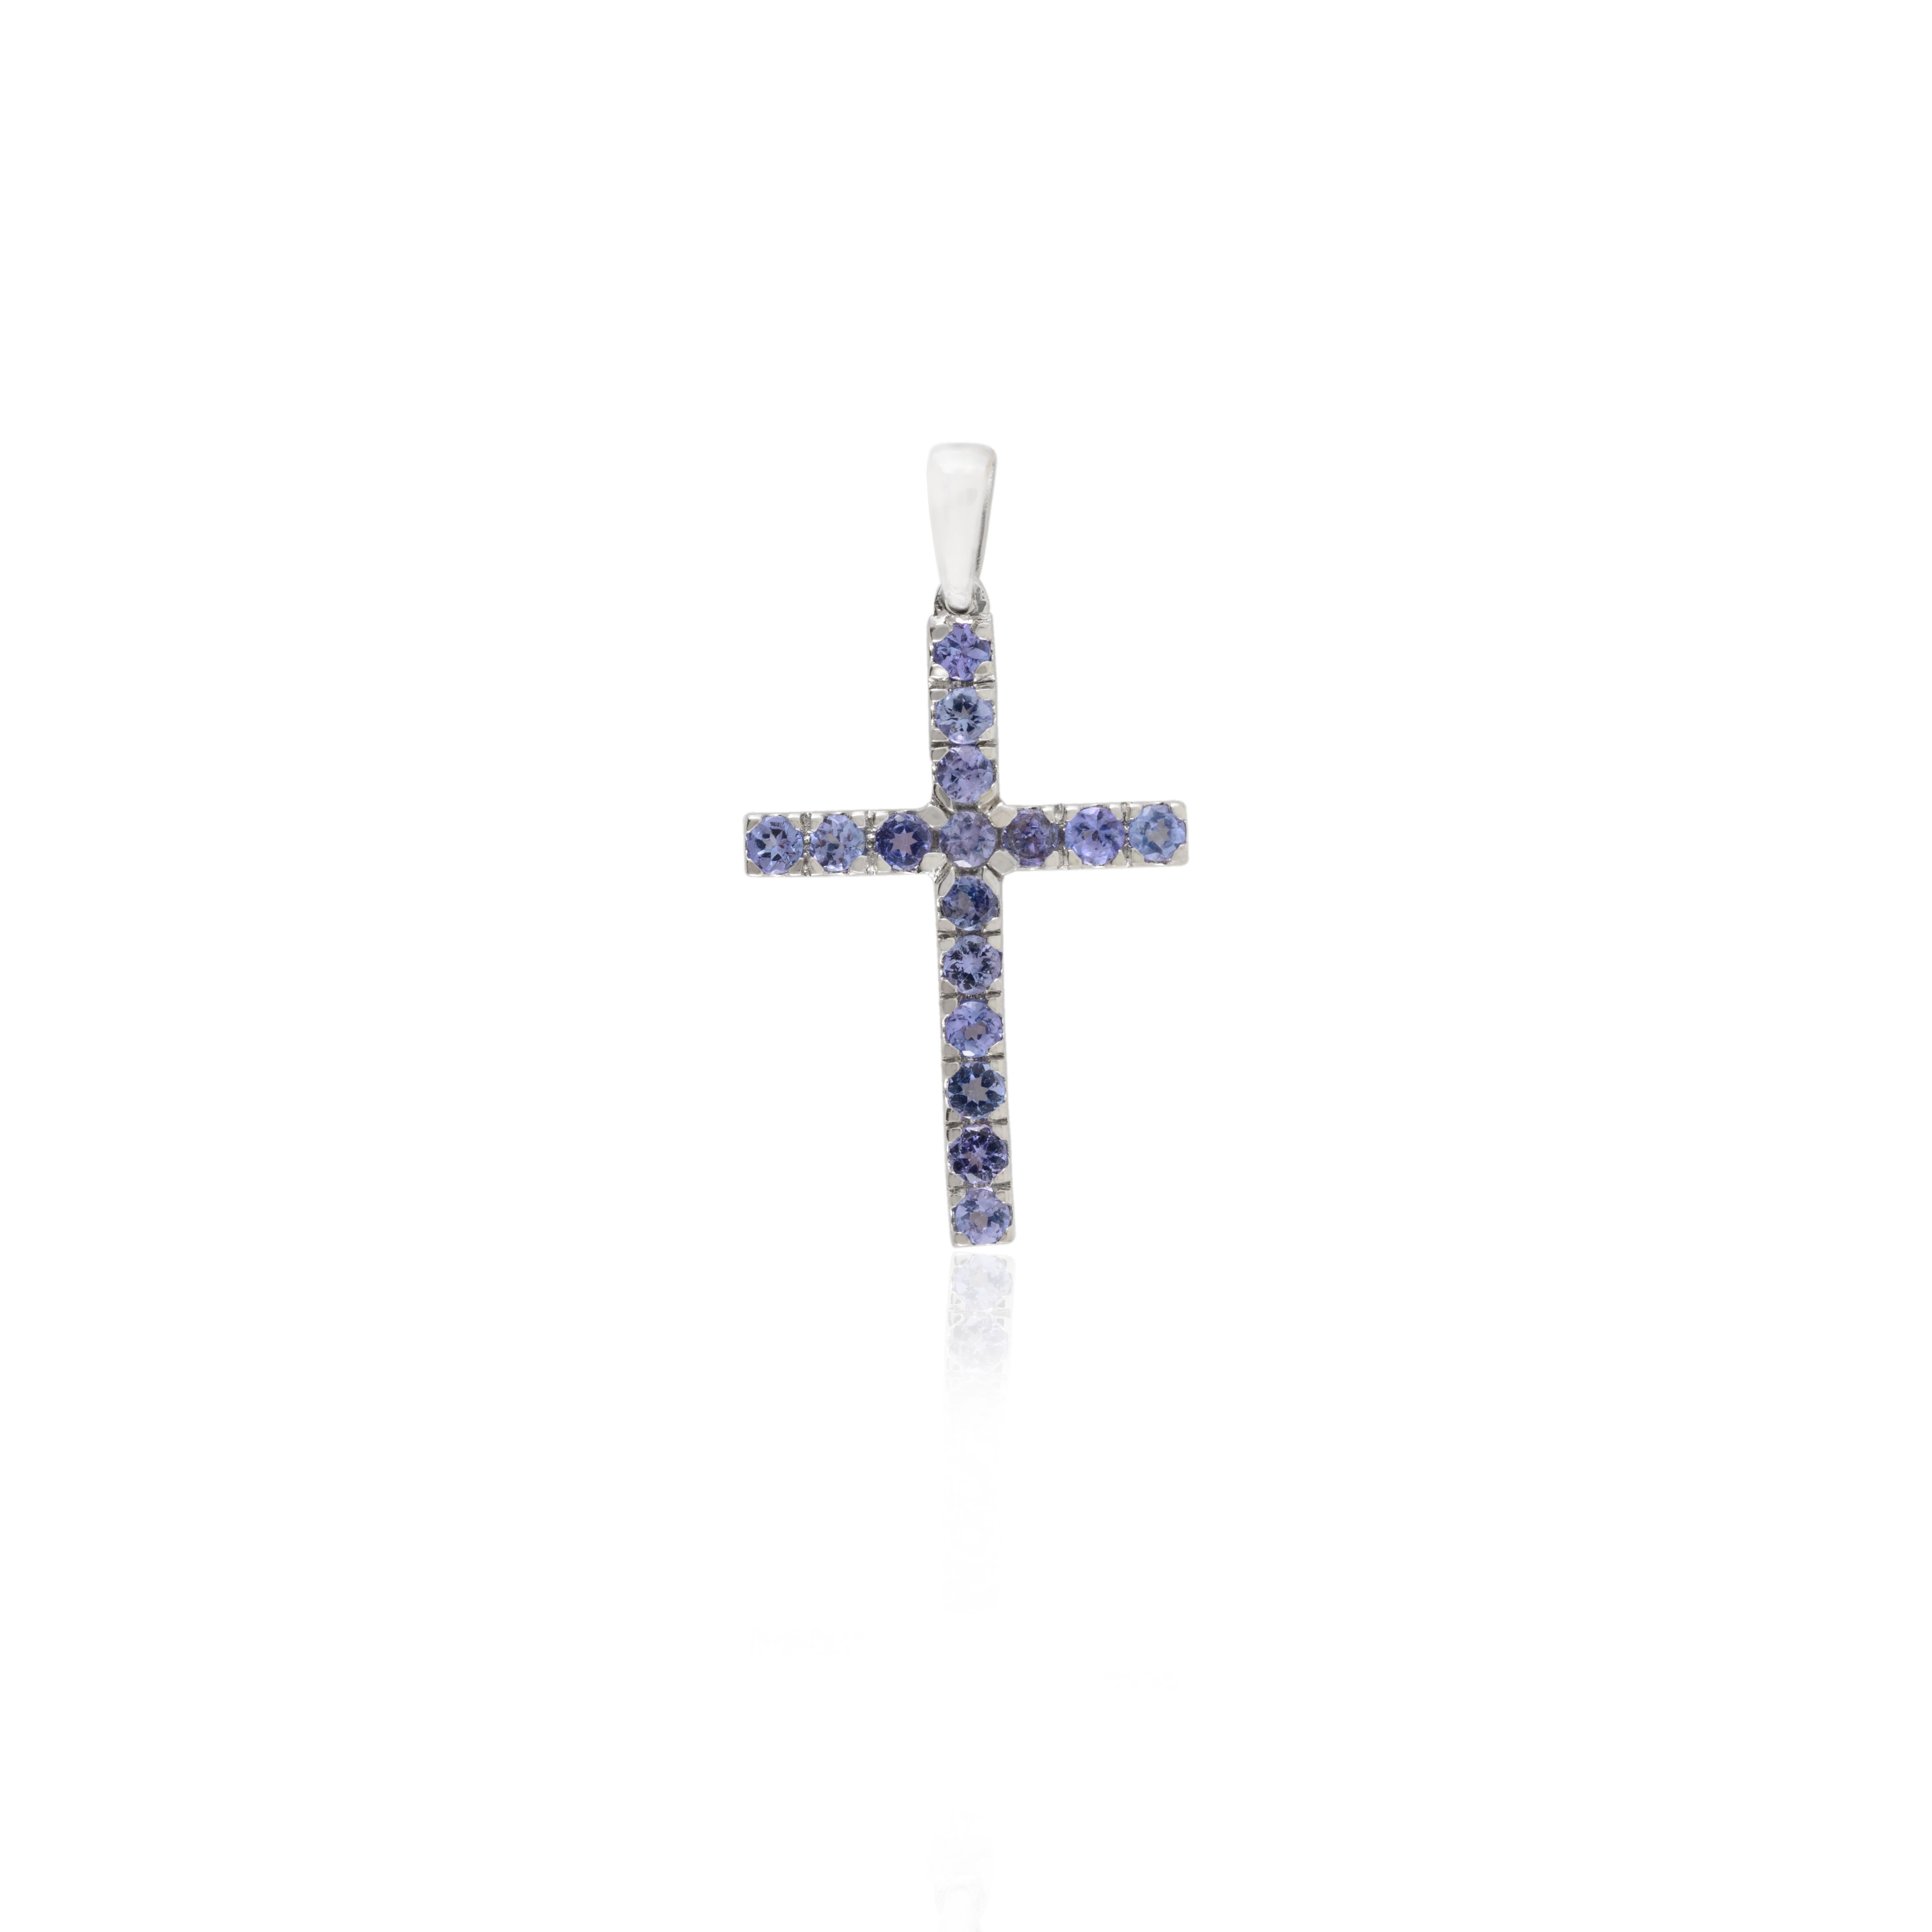 Genuine Tanzanite Cross Pendant in 18K Gold studded with round cut tanzanite. This stunning piece of jewelry instantly elevates a casual look or dressy outfit. 
Tanzanite brings energy, calmness and happiness into life. 
Designed with round cut